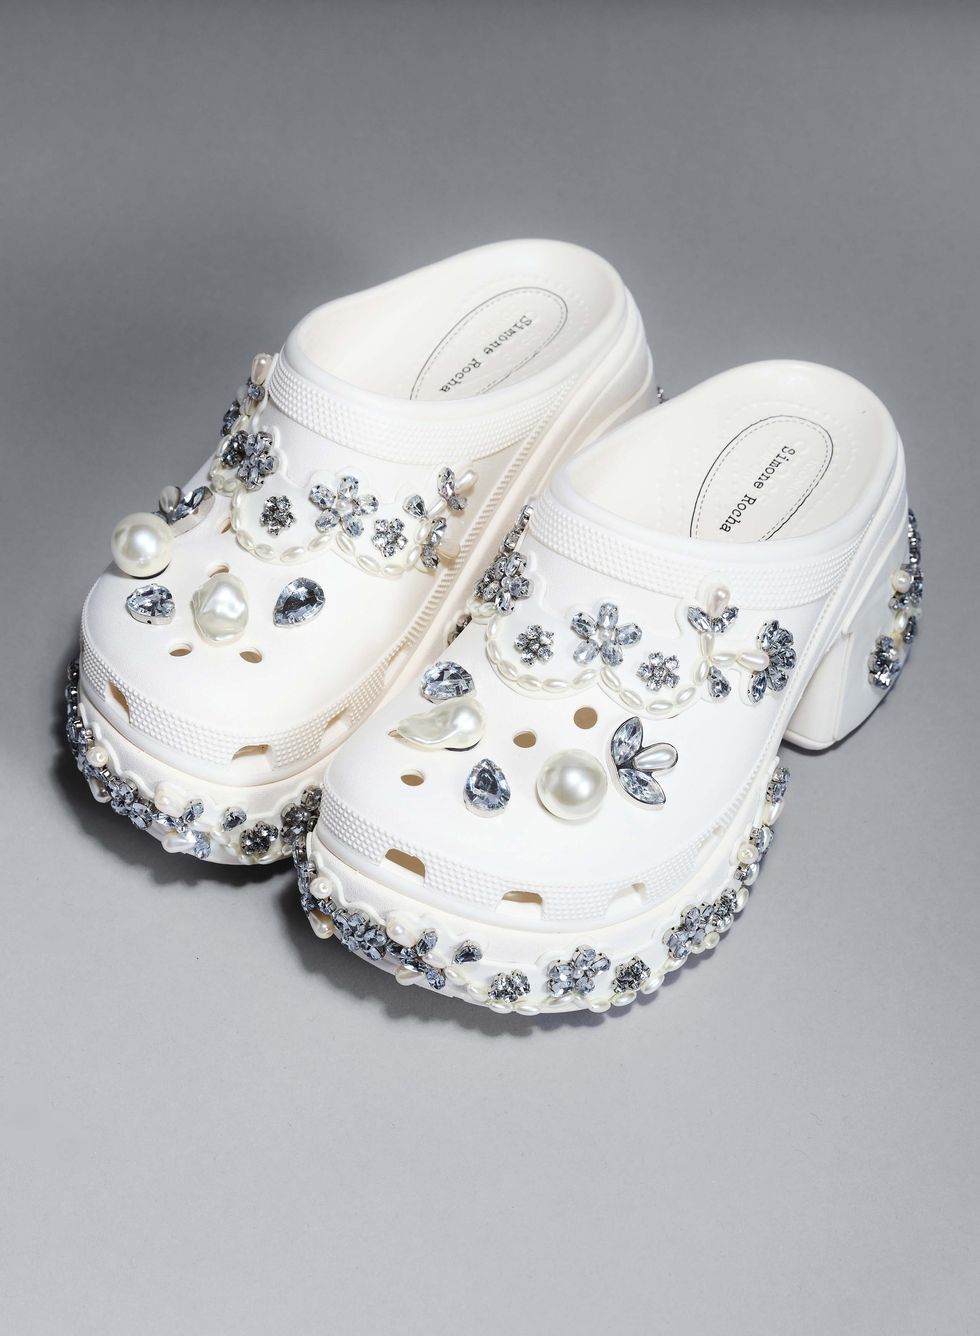 Simone Rocha's Crocs collection will be available next week